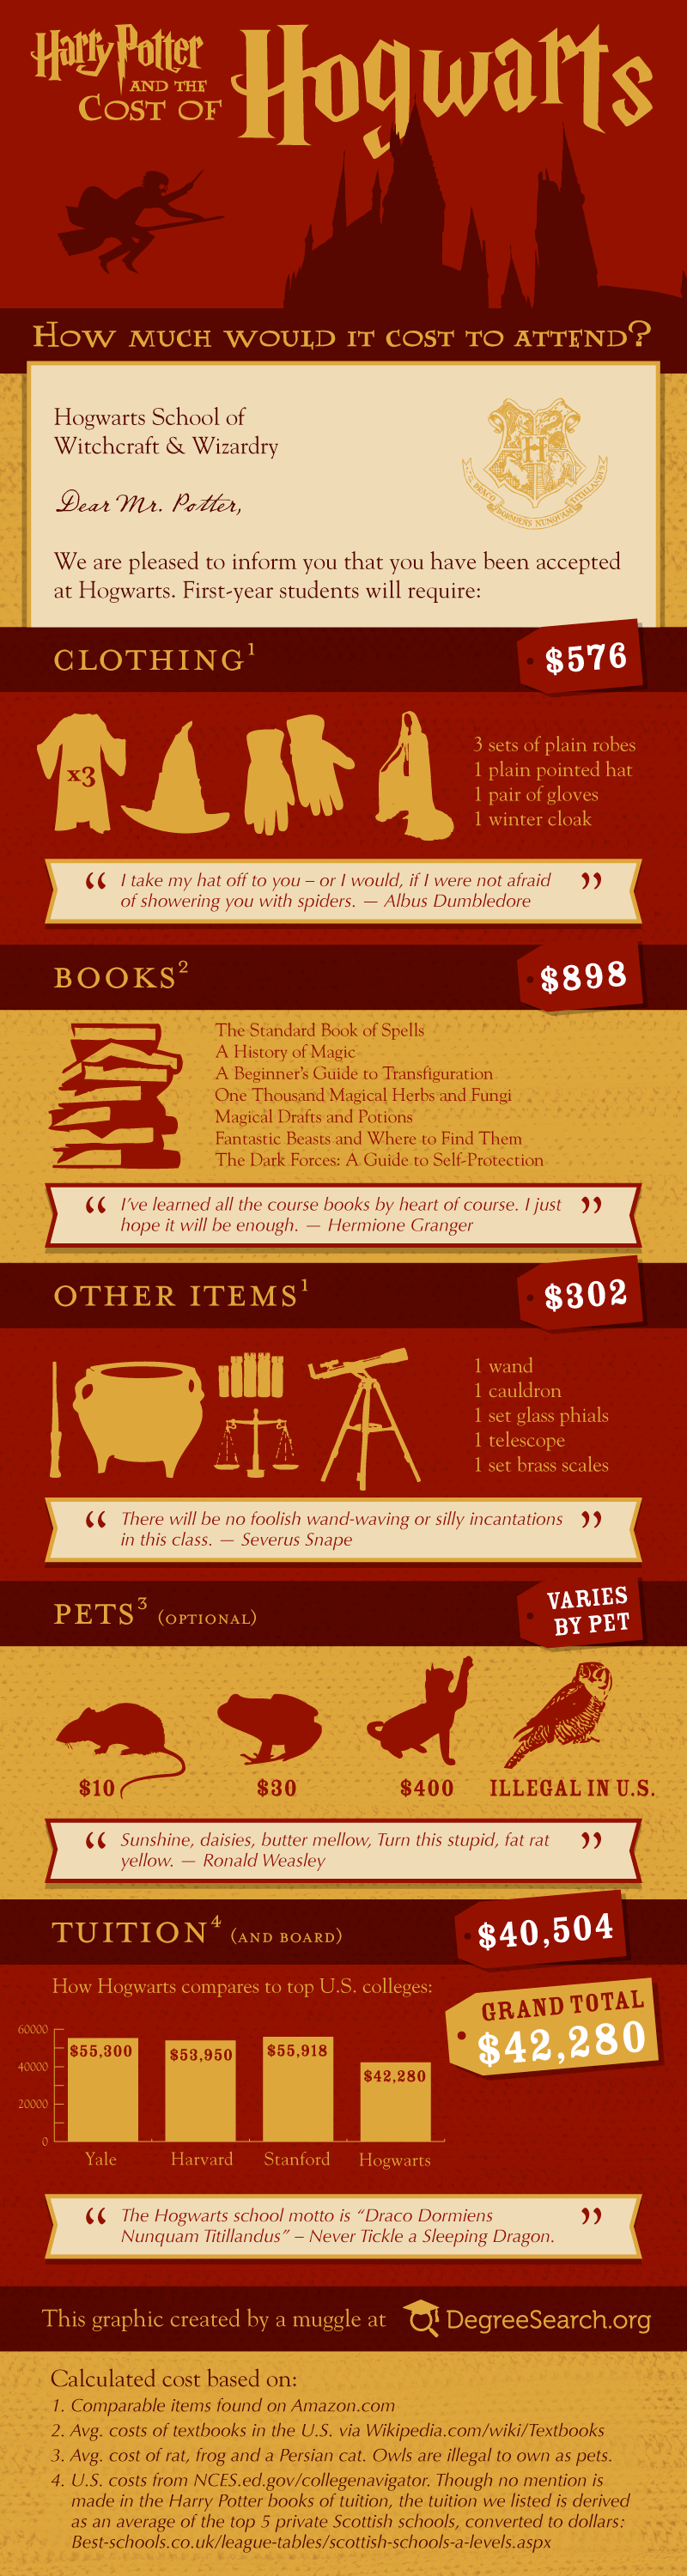 Harry Potter and the Cost of Hogwarts Infographic